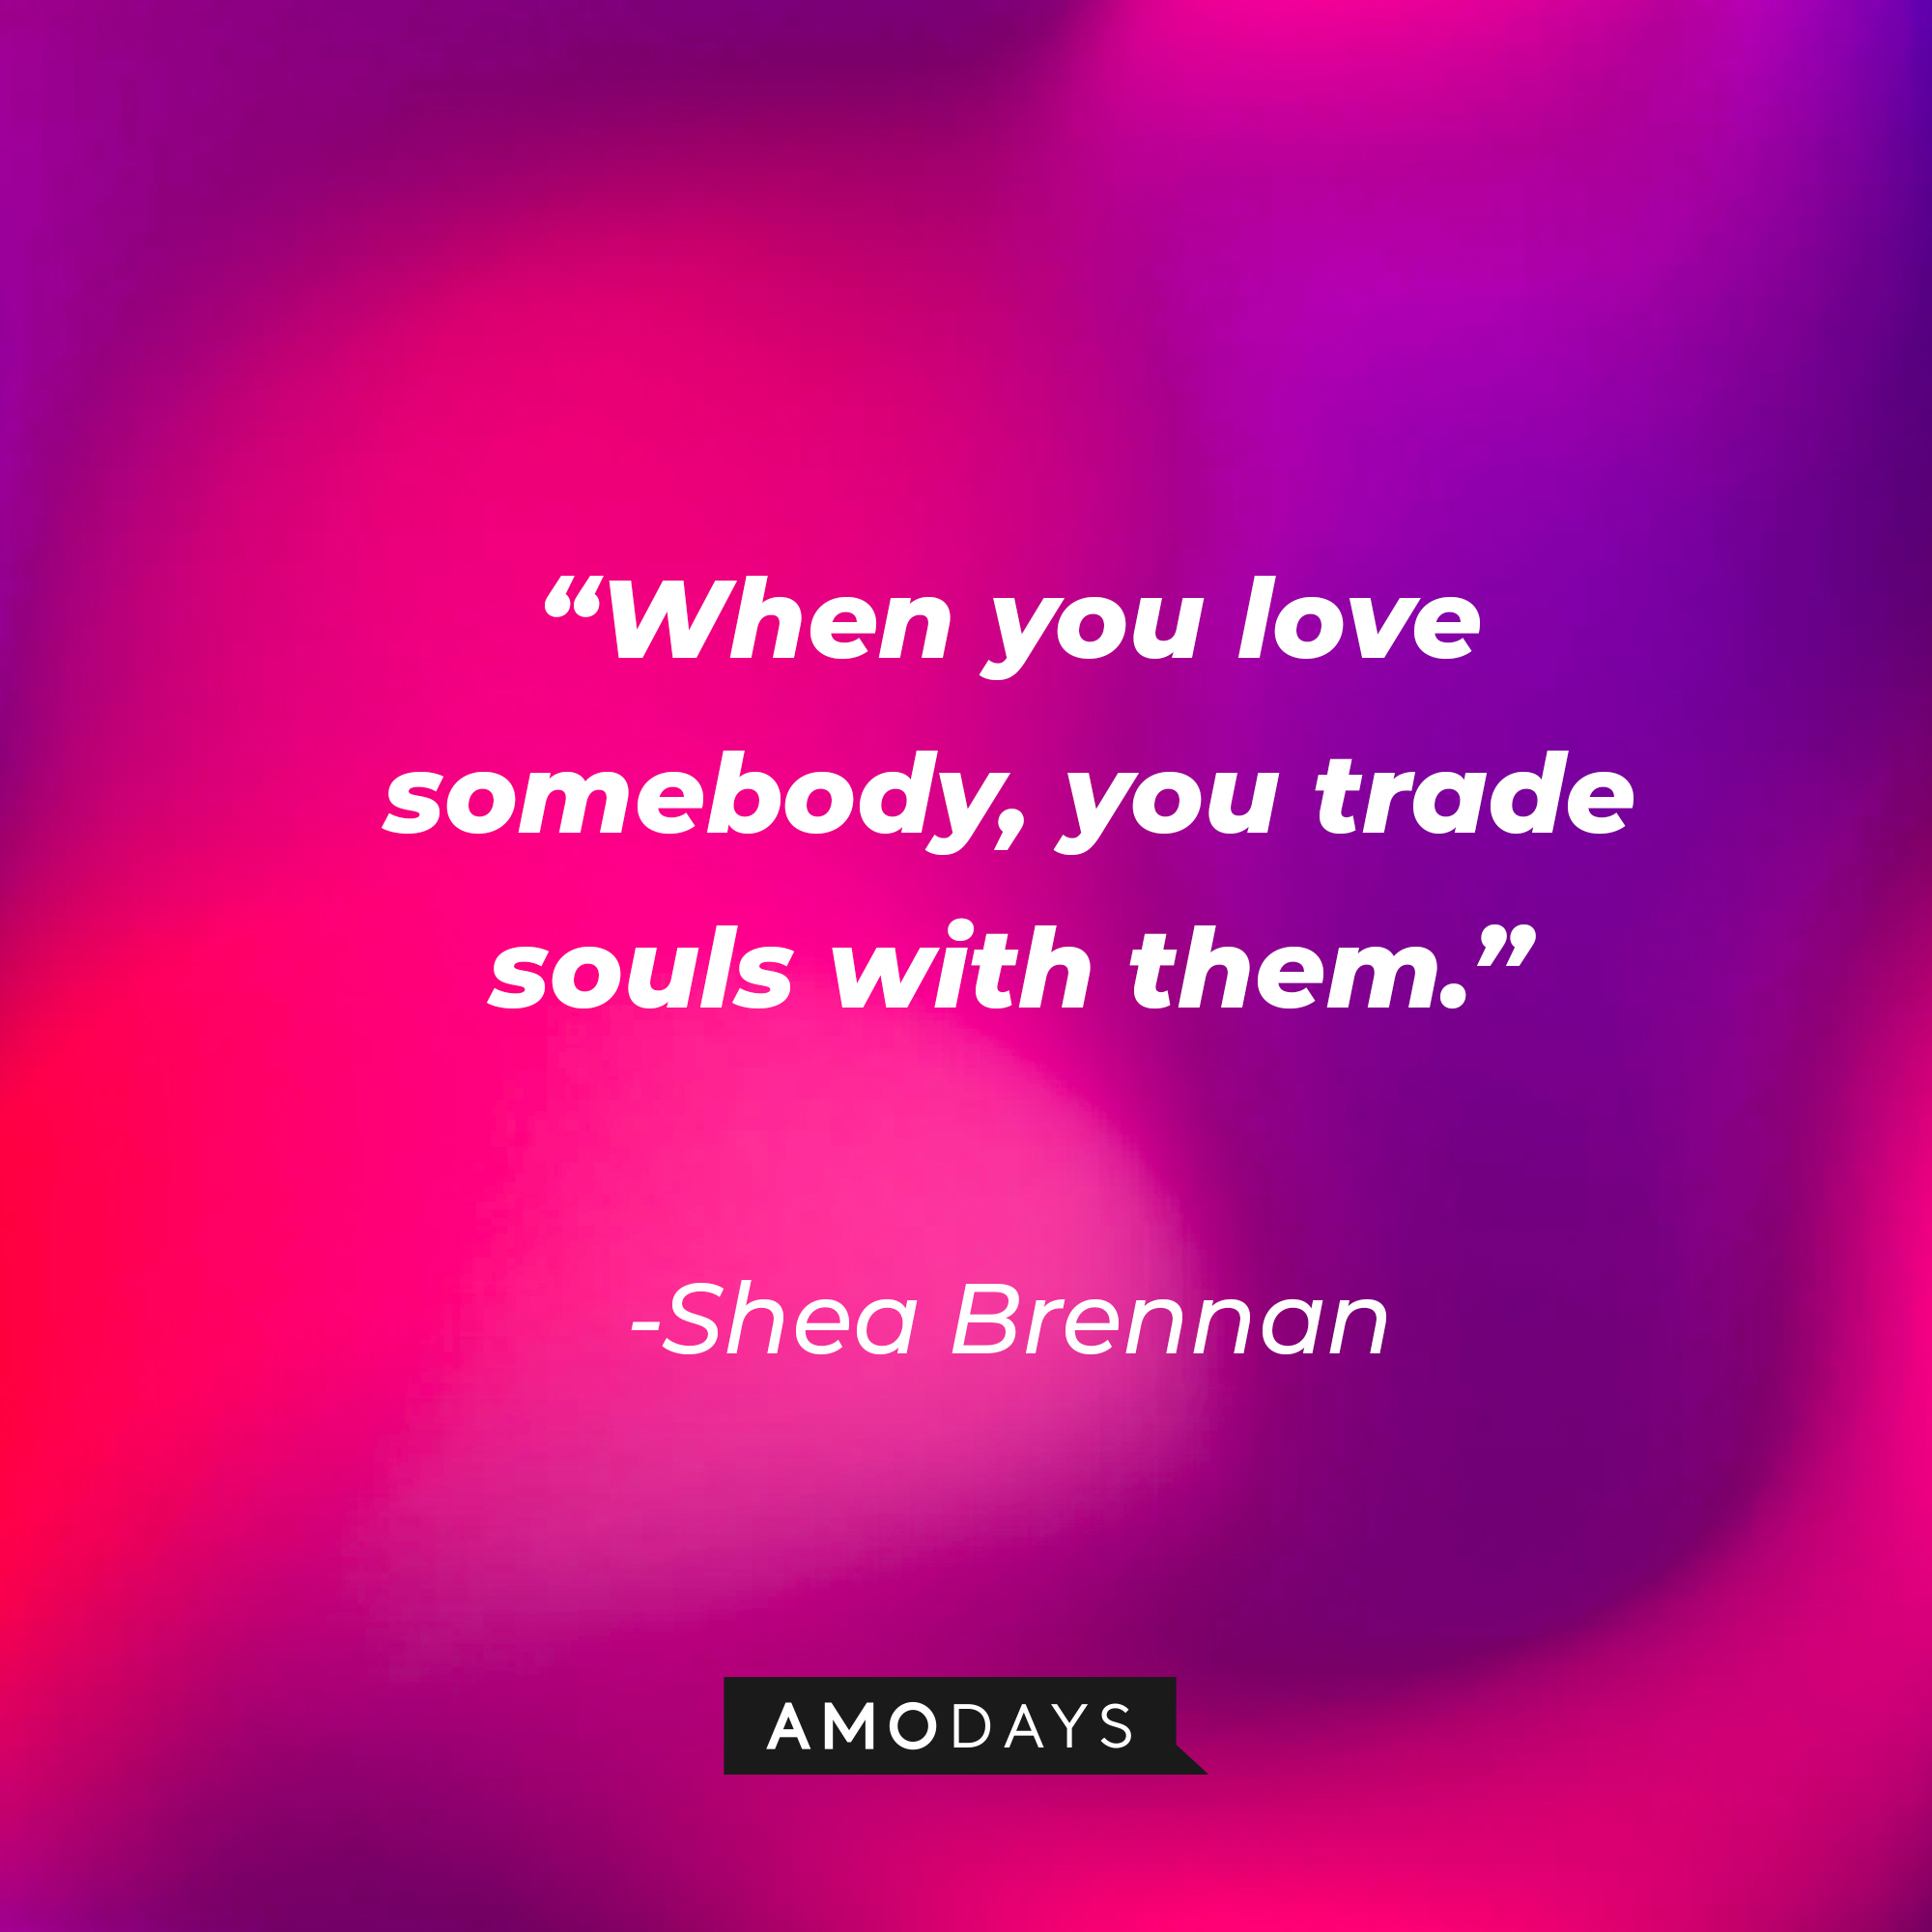 Shea Brennan’s quote: “When you love someone you trade souls with them.” | Source: AmoDays